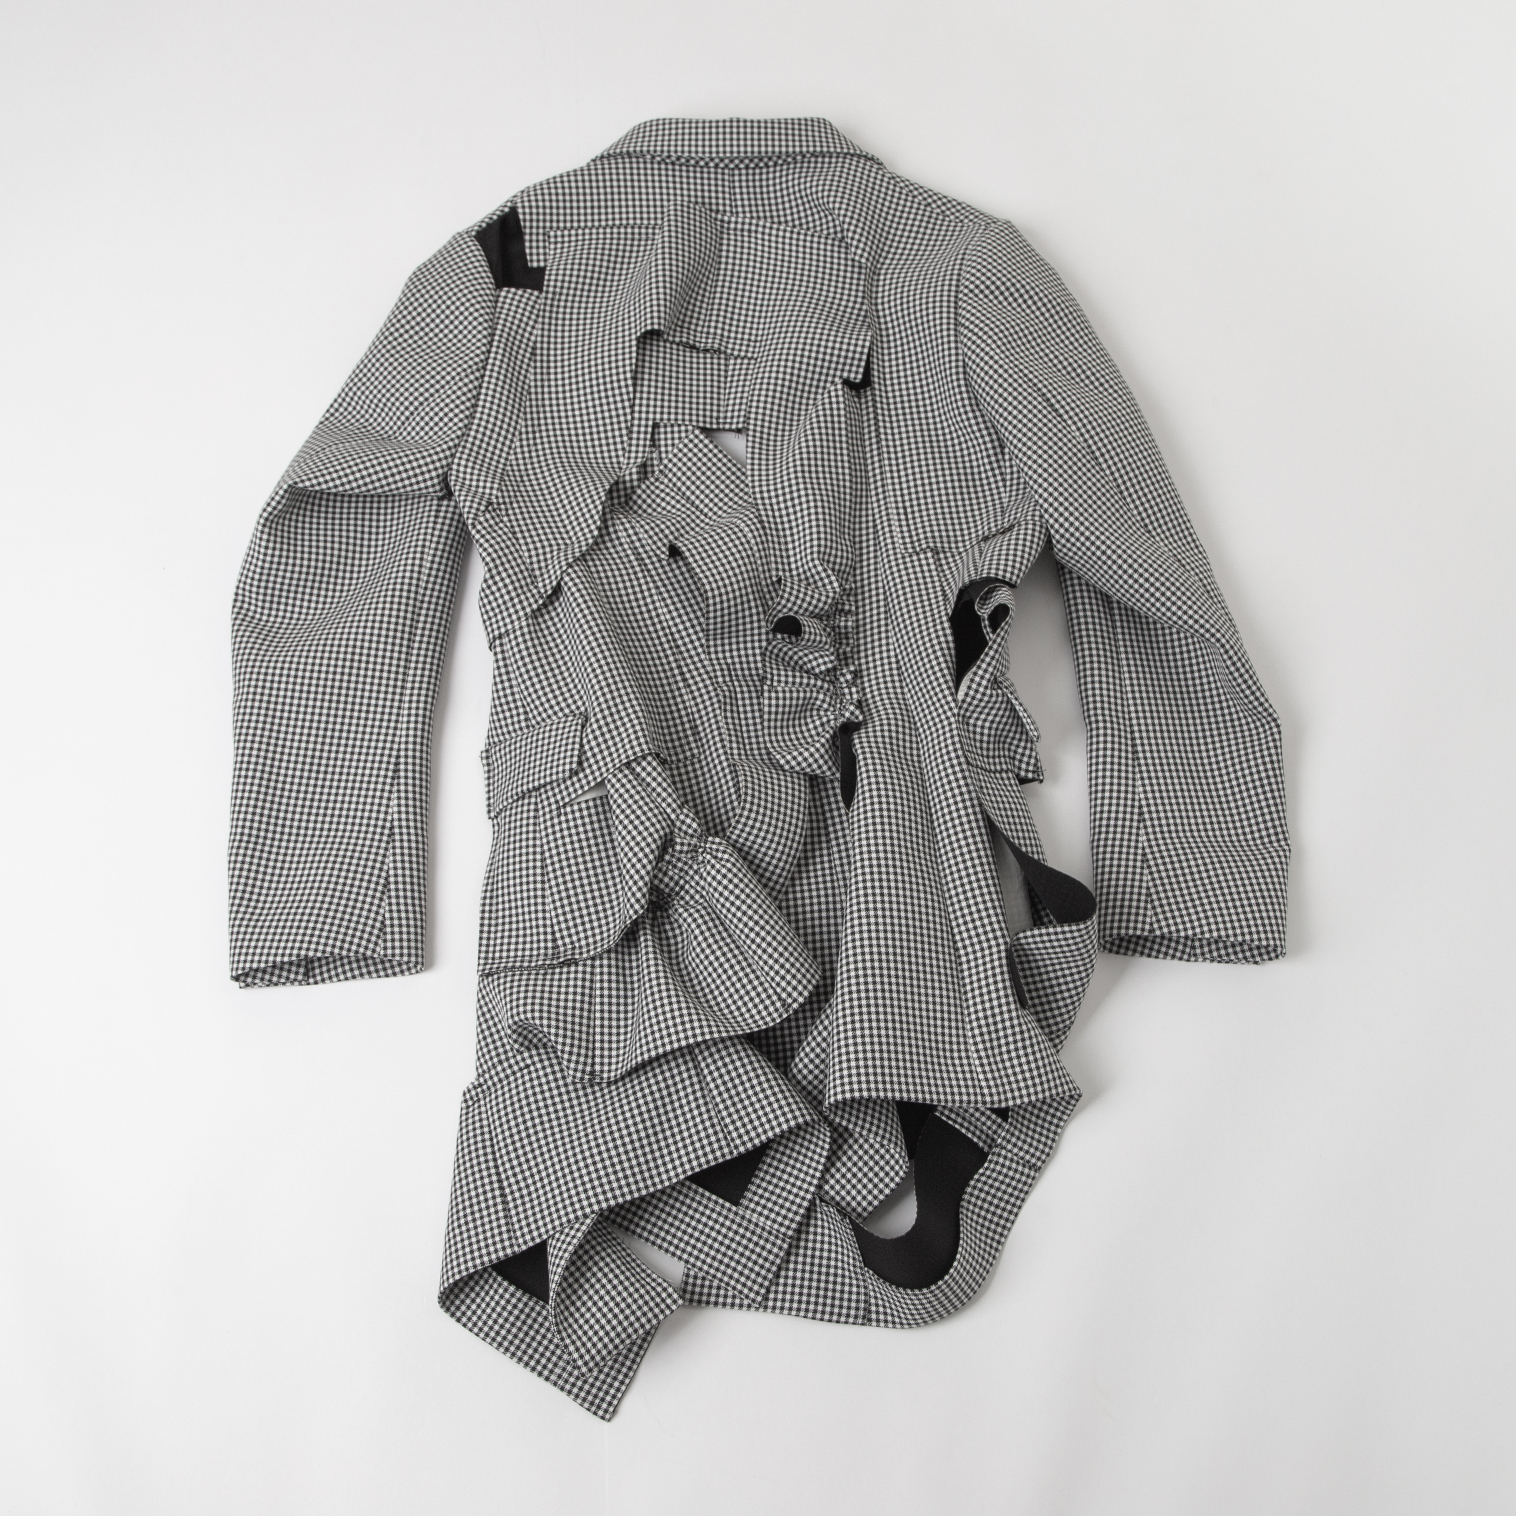 COMME des GARCONS AD2013 Puppy tooth Cutting Design Jacket